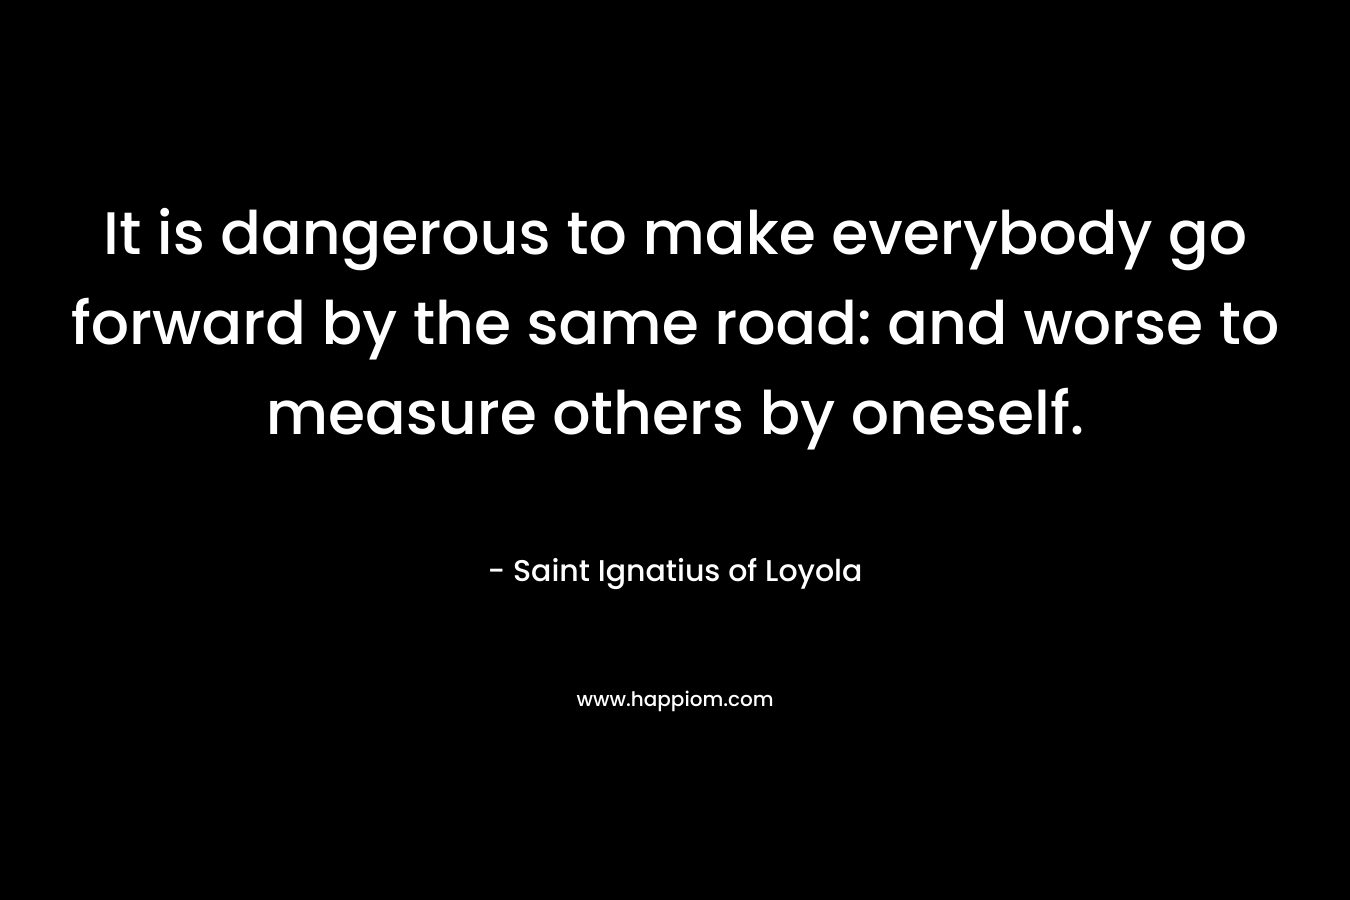 It is dangerous to make everybody go forward by the same road: and worse to measure others by oneself. – Saint Ignatius of Loyola